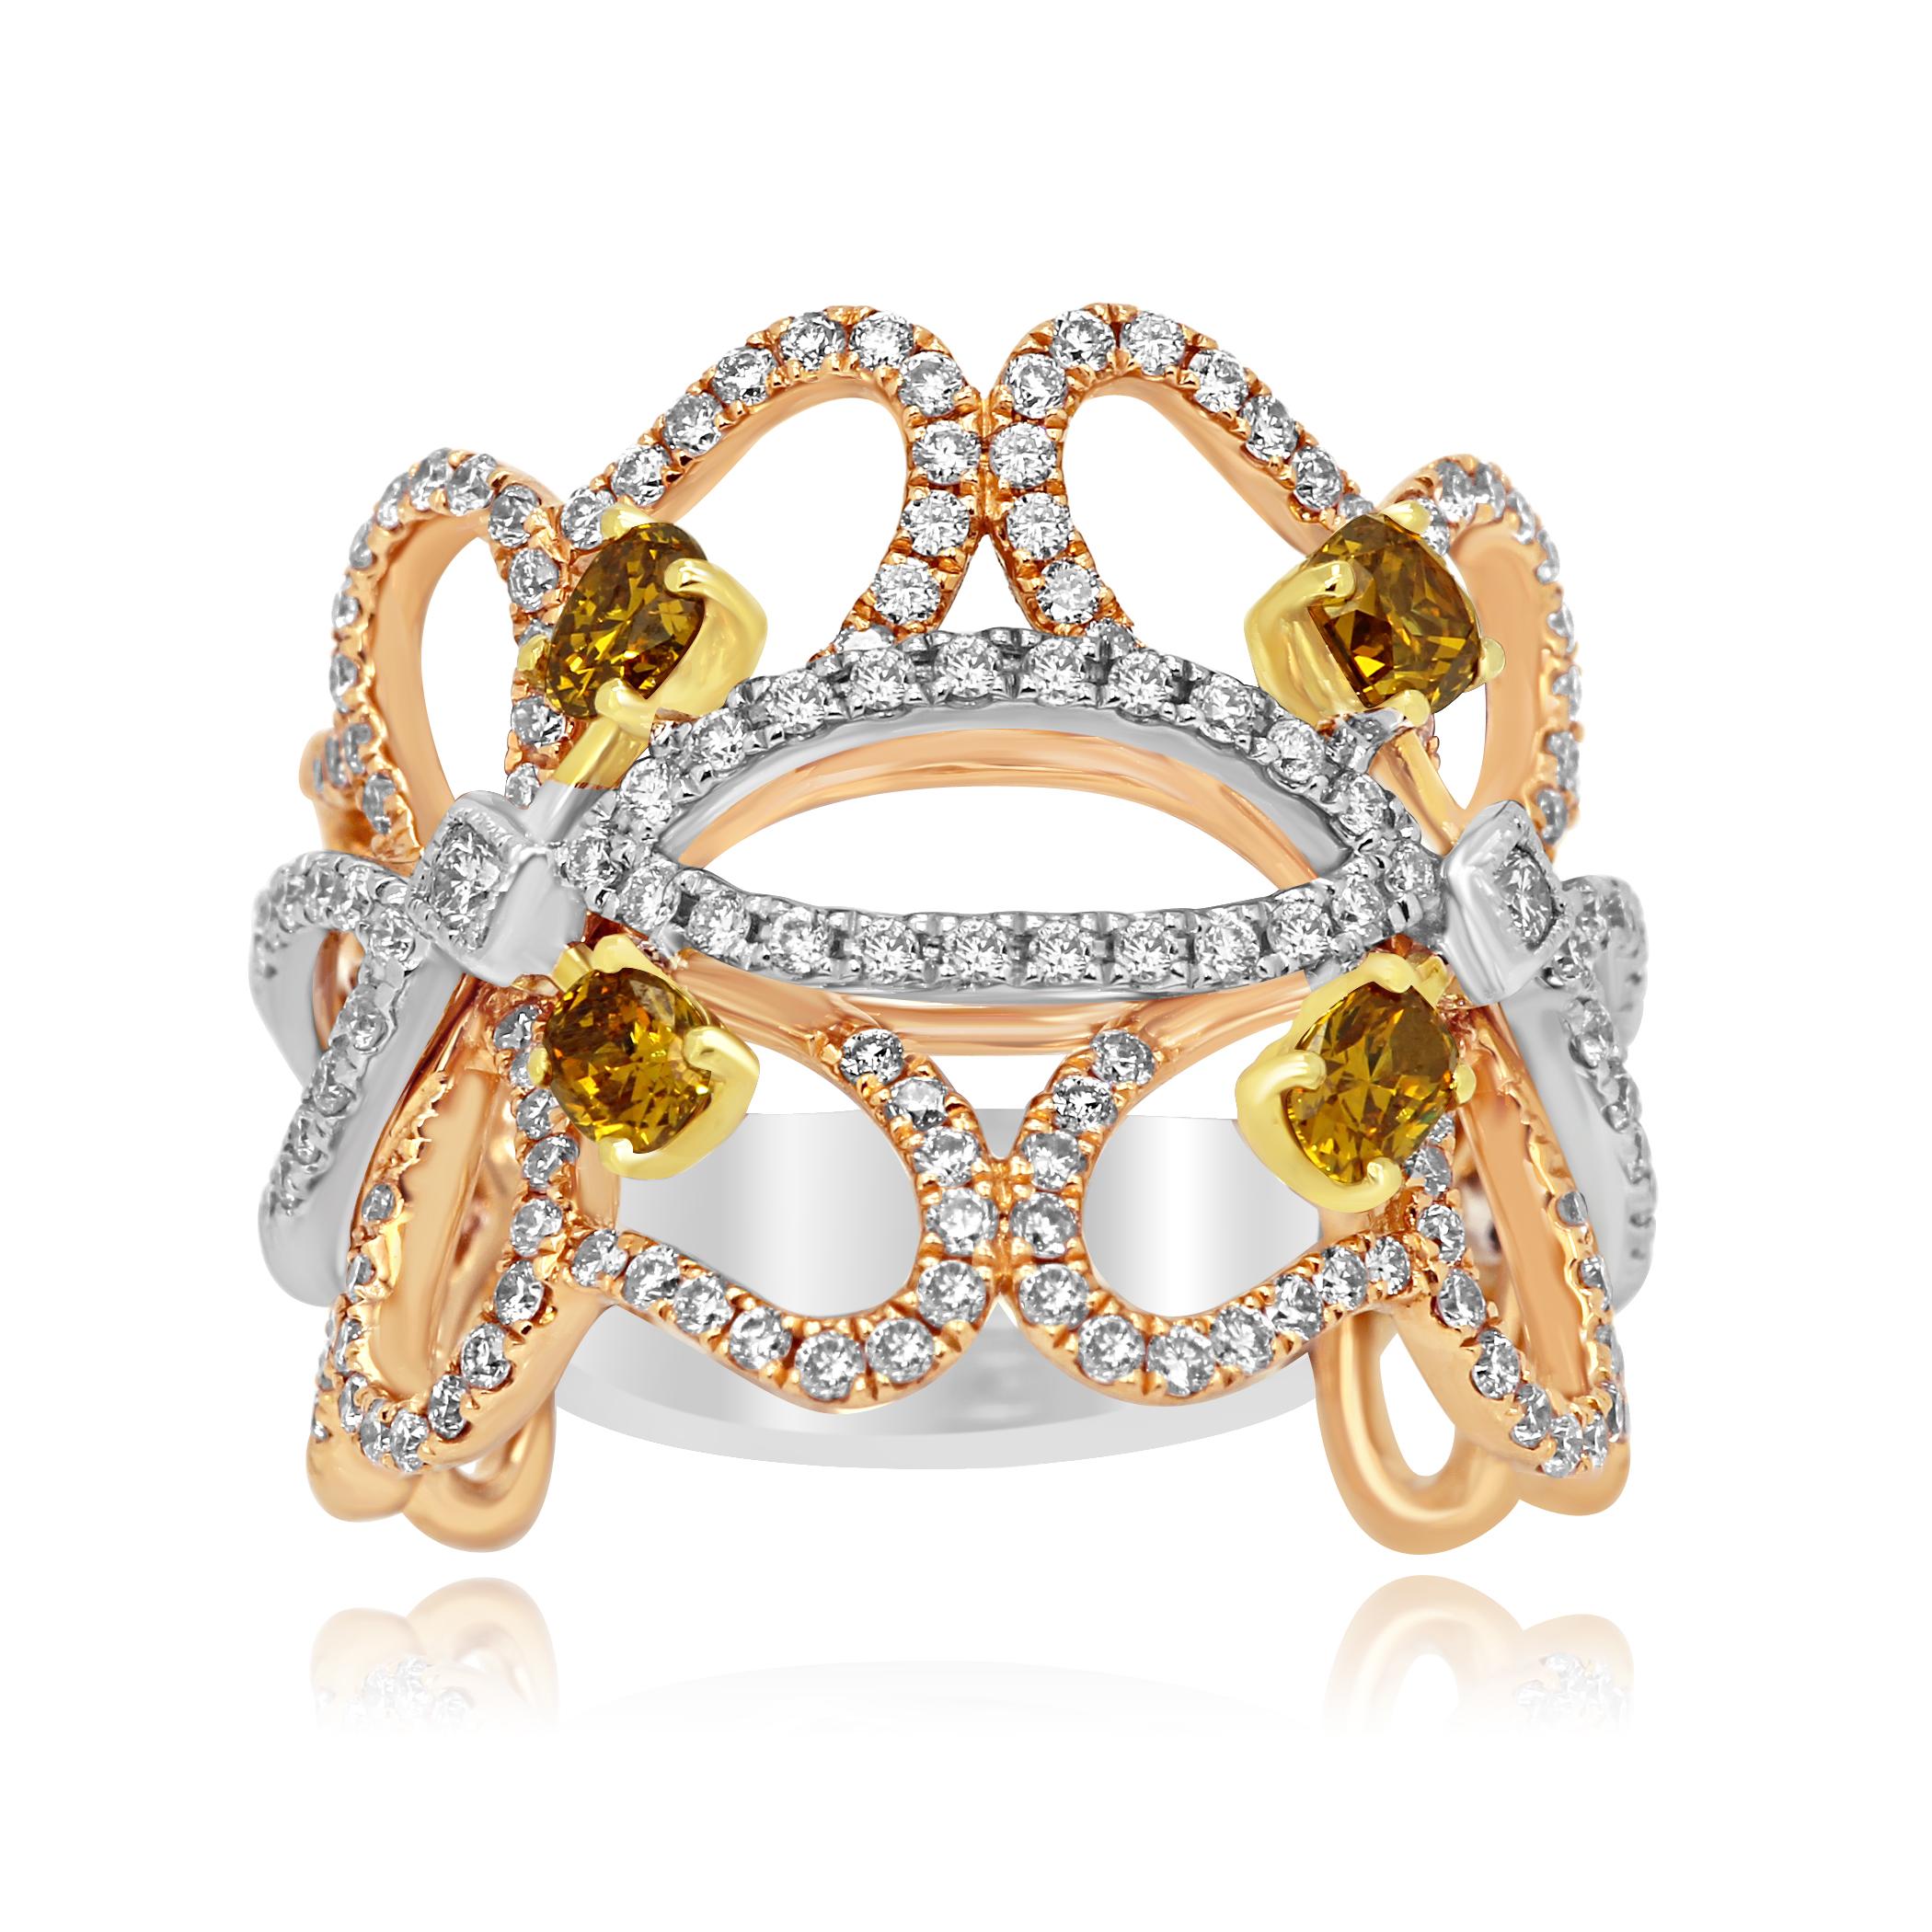 Stunning and stylish 4 Natural Fancy Orange Yellow cushion diamonds 0.47 carat set with natural Pink Round Diamonds 0.60 Carat and white diamonds rounds 0.26 Carat in 18K White, Yellow and Rose Gold Cocktail Fashion Band Ring.

Total Diamond Weight